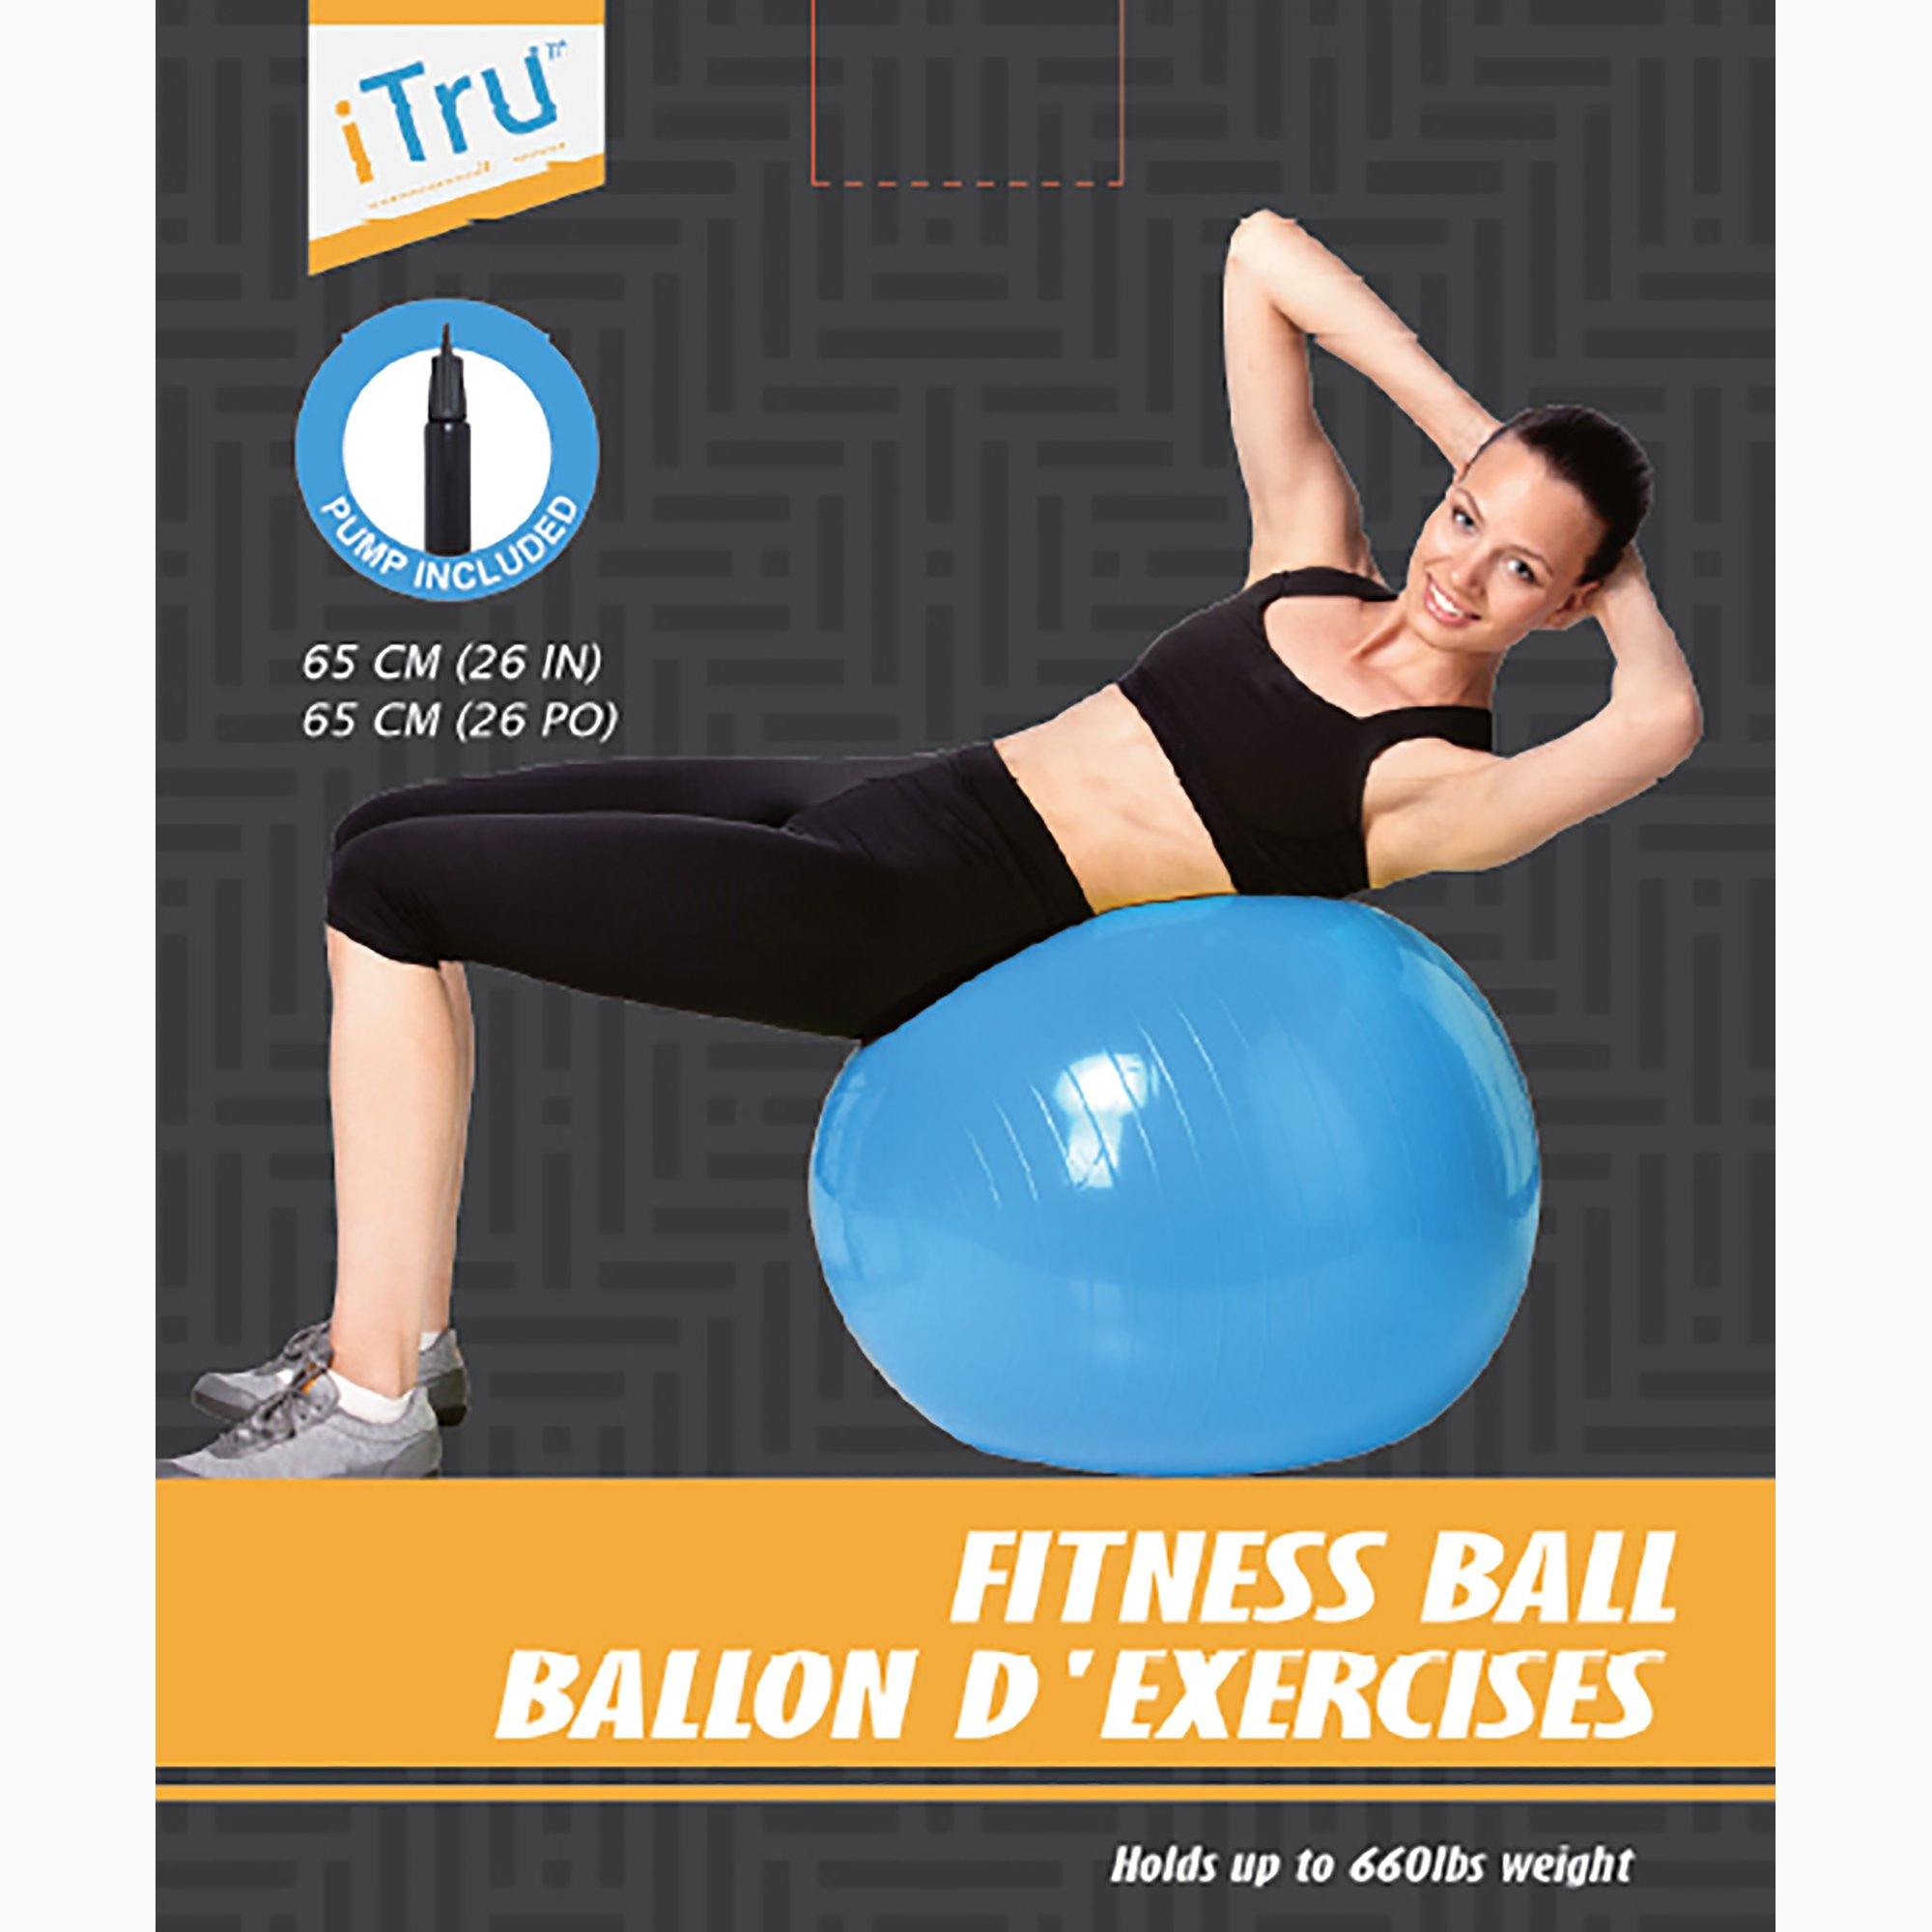 Fitness/Yoga Ball - 65cm - Pump Included